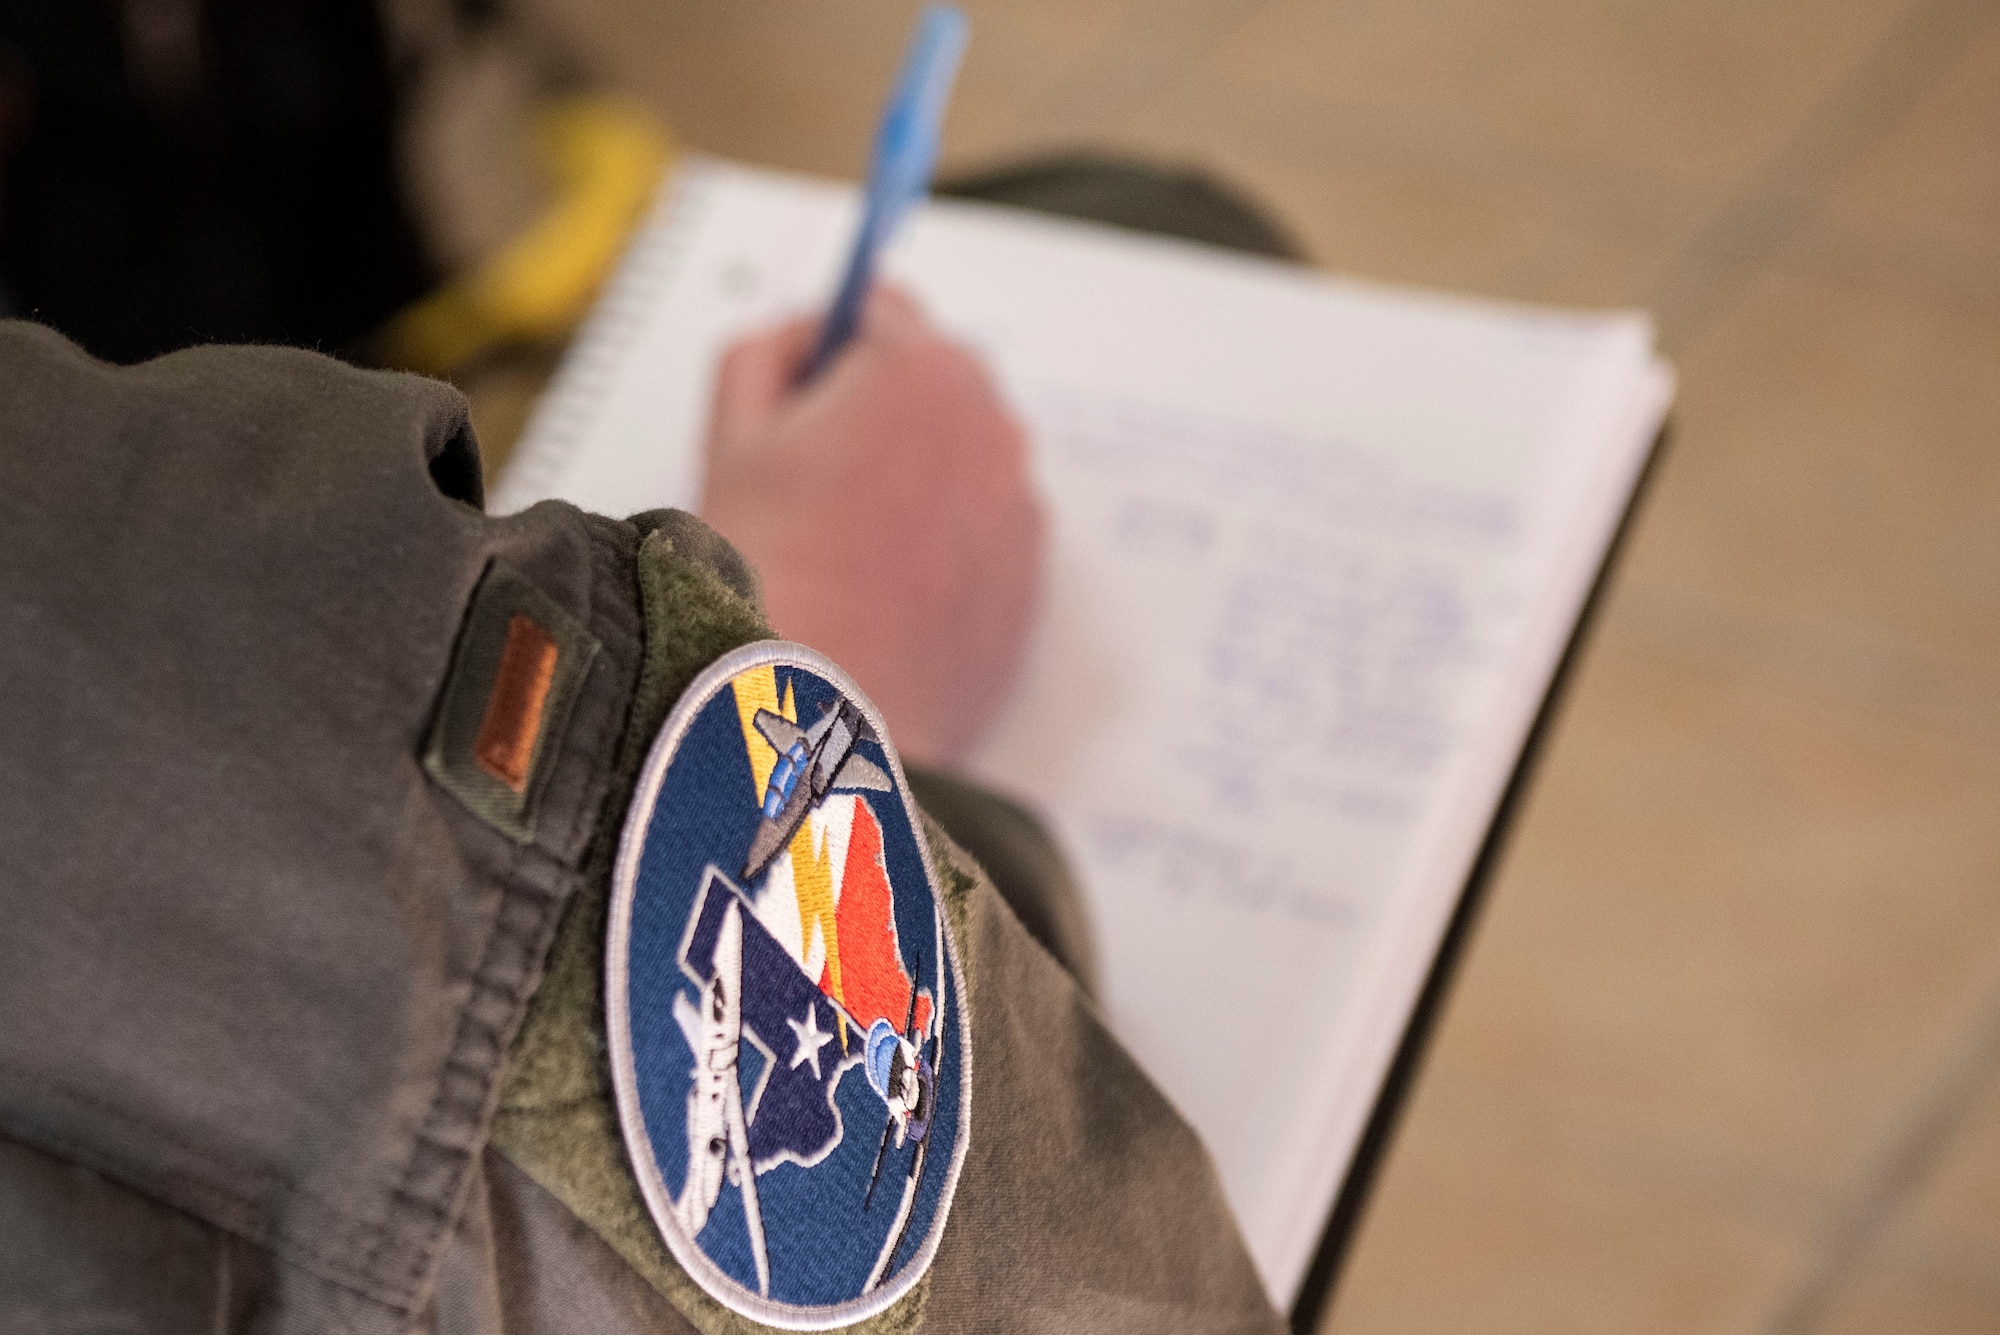 A Student pilot taking notes over the courses they will be expected to take during their course. Feb. 03, 2021 at Laughlin Air Force Base, Texas. Students must have a good study habit and time management skills to be able to keep up with the workload. (U.S. Air Force photo by Airman 1st Class David Phaff)